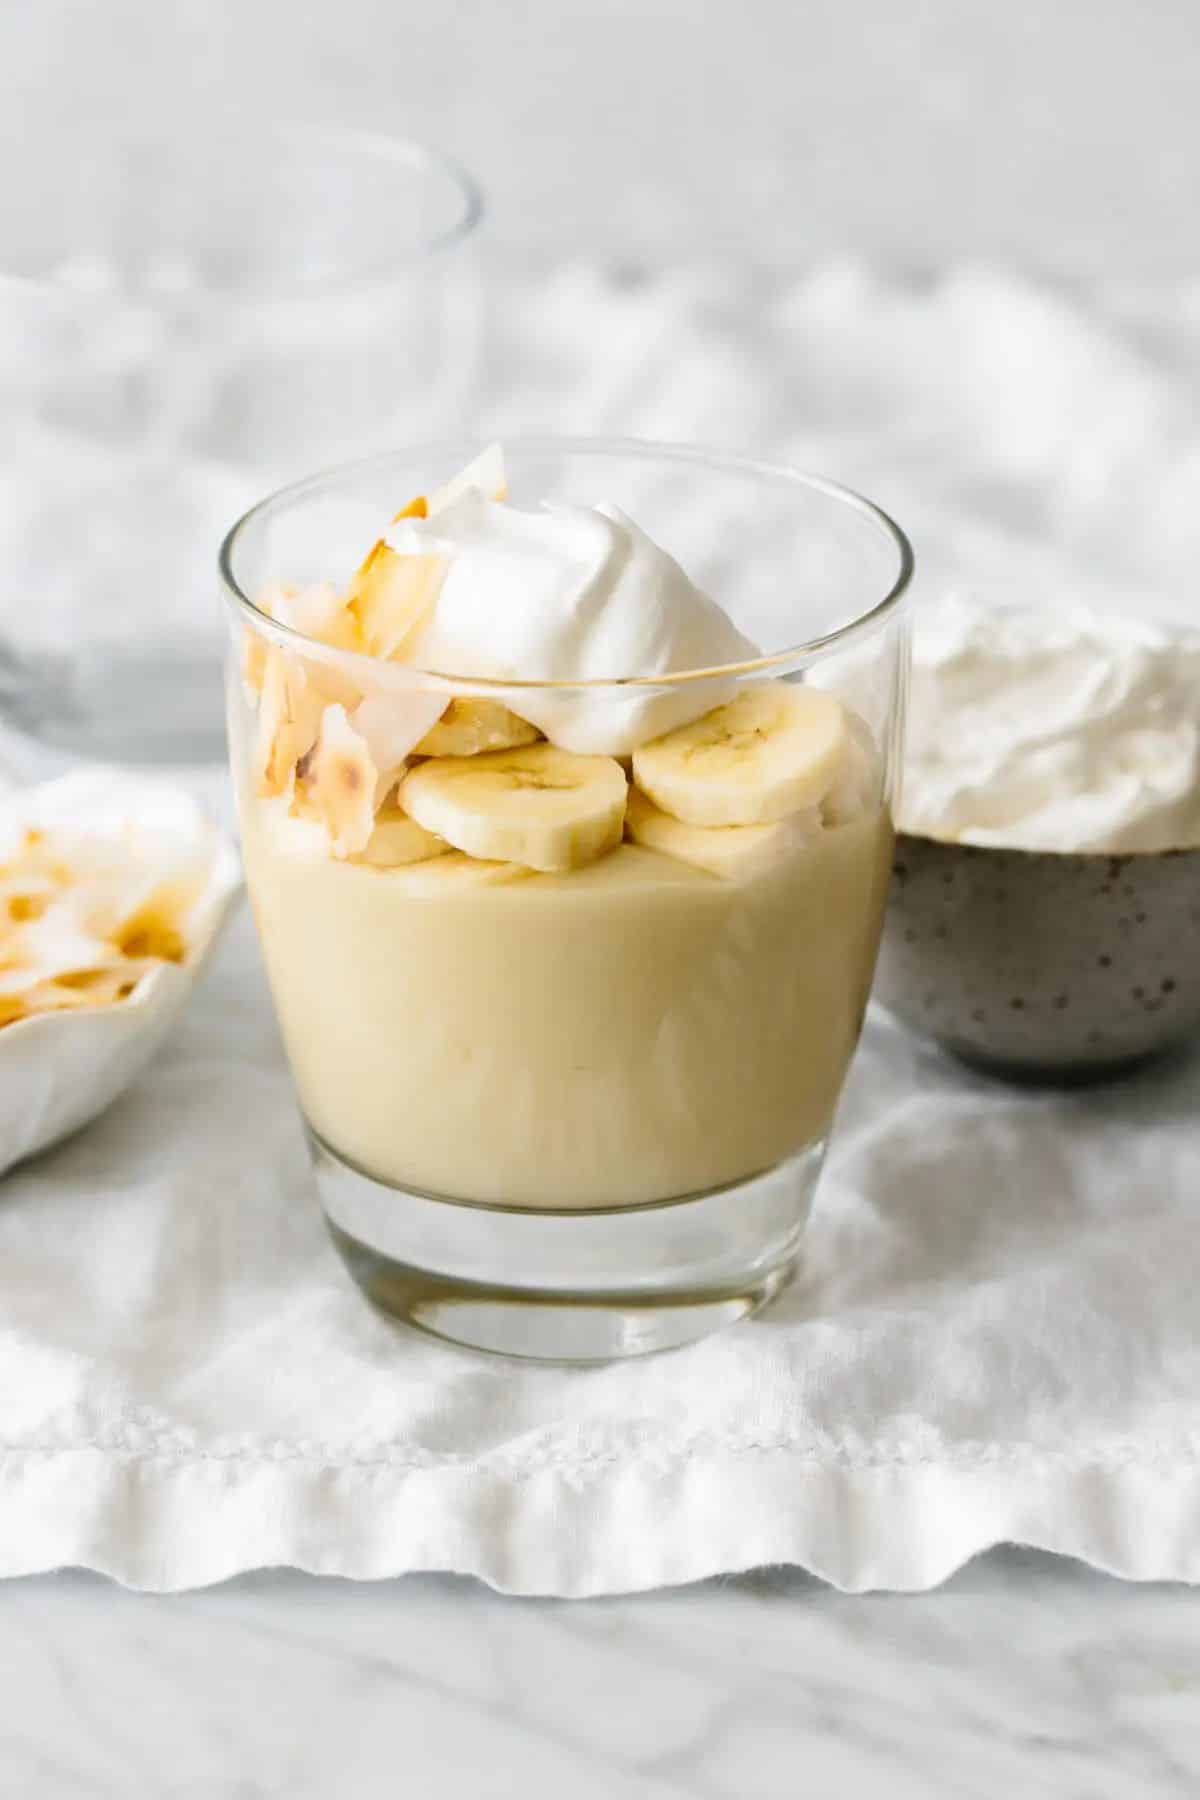 Delicious Fresh Banana Pudding in a glass cup.